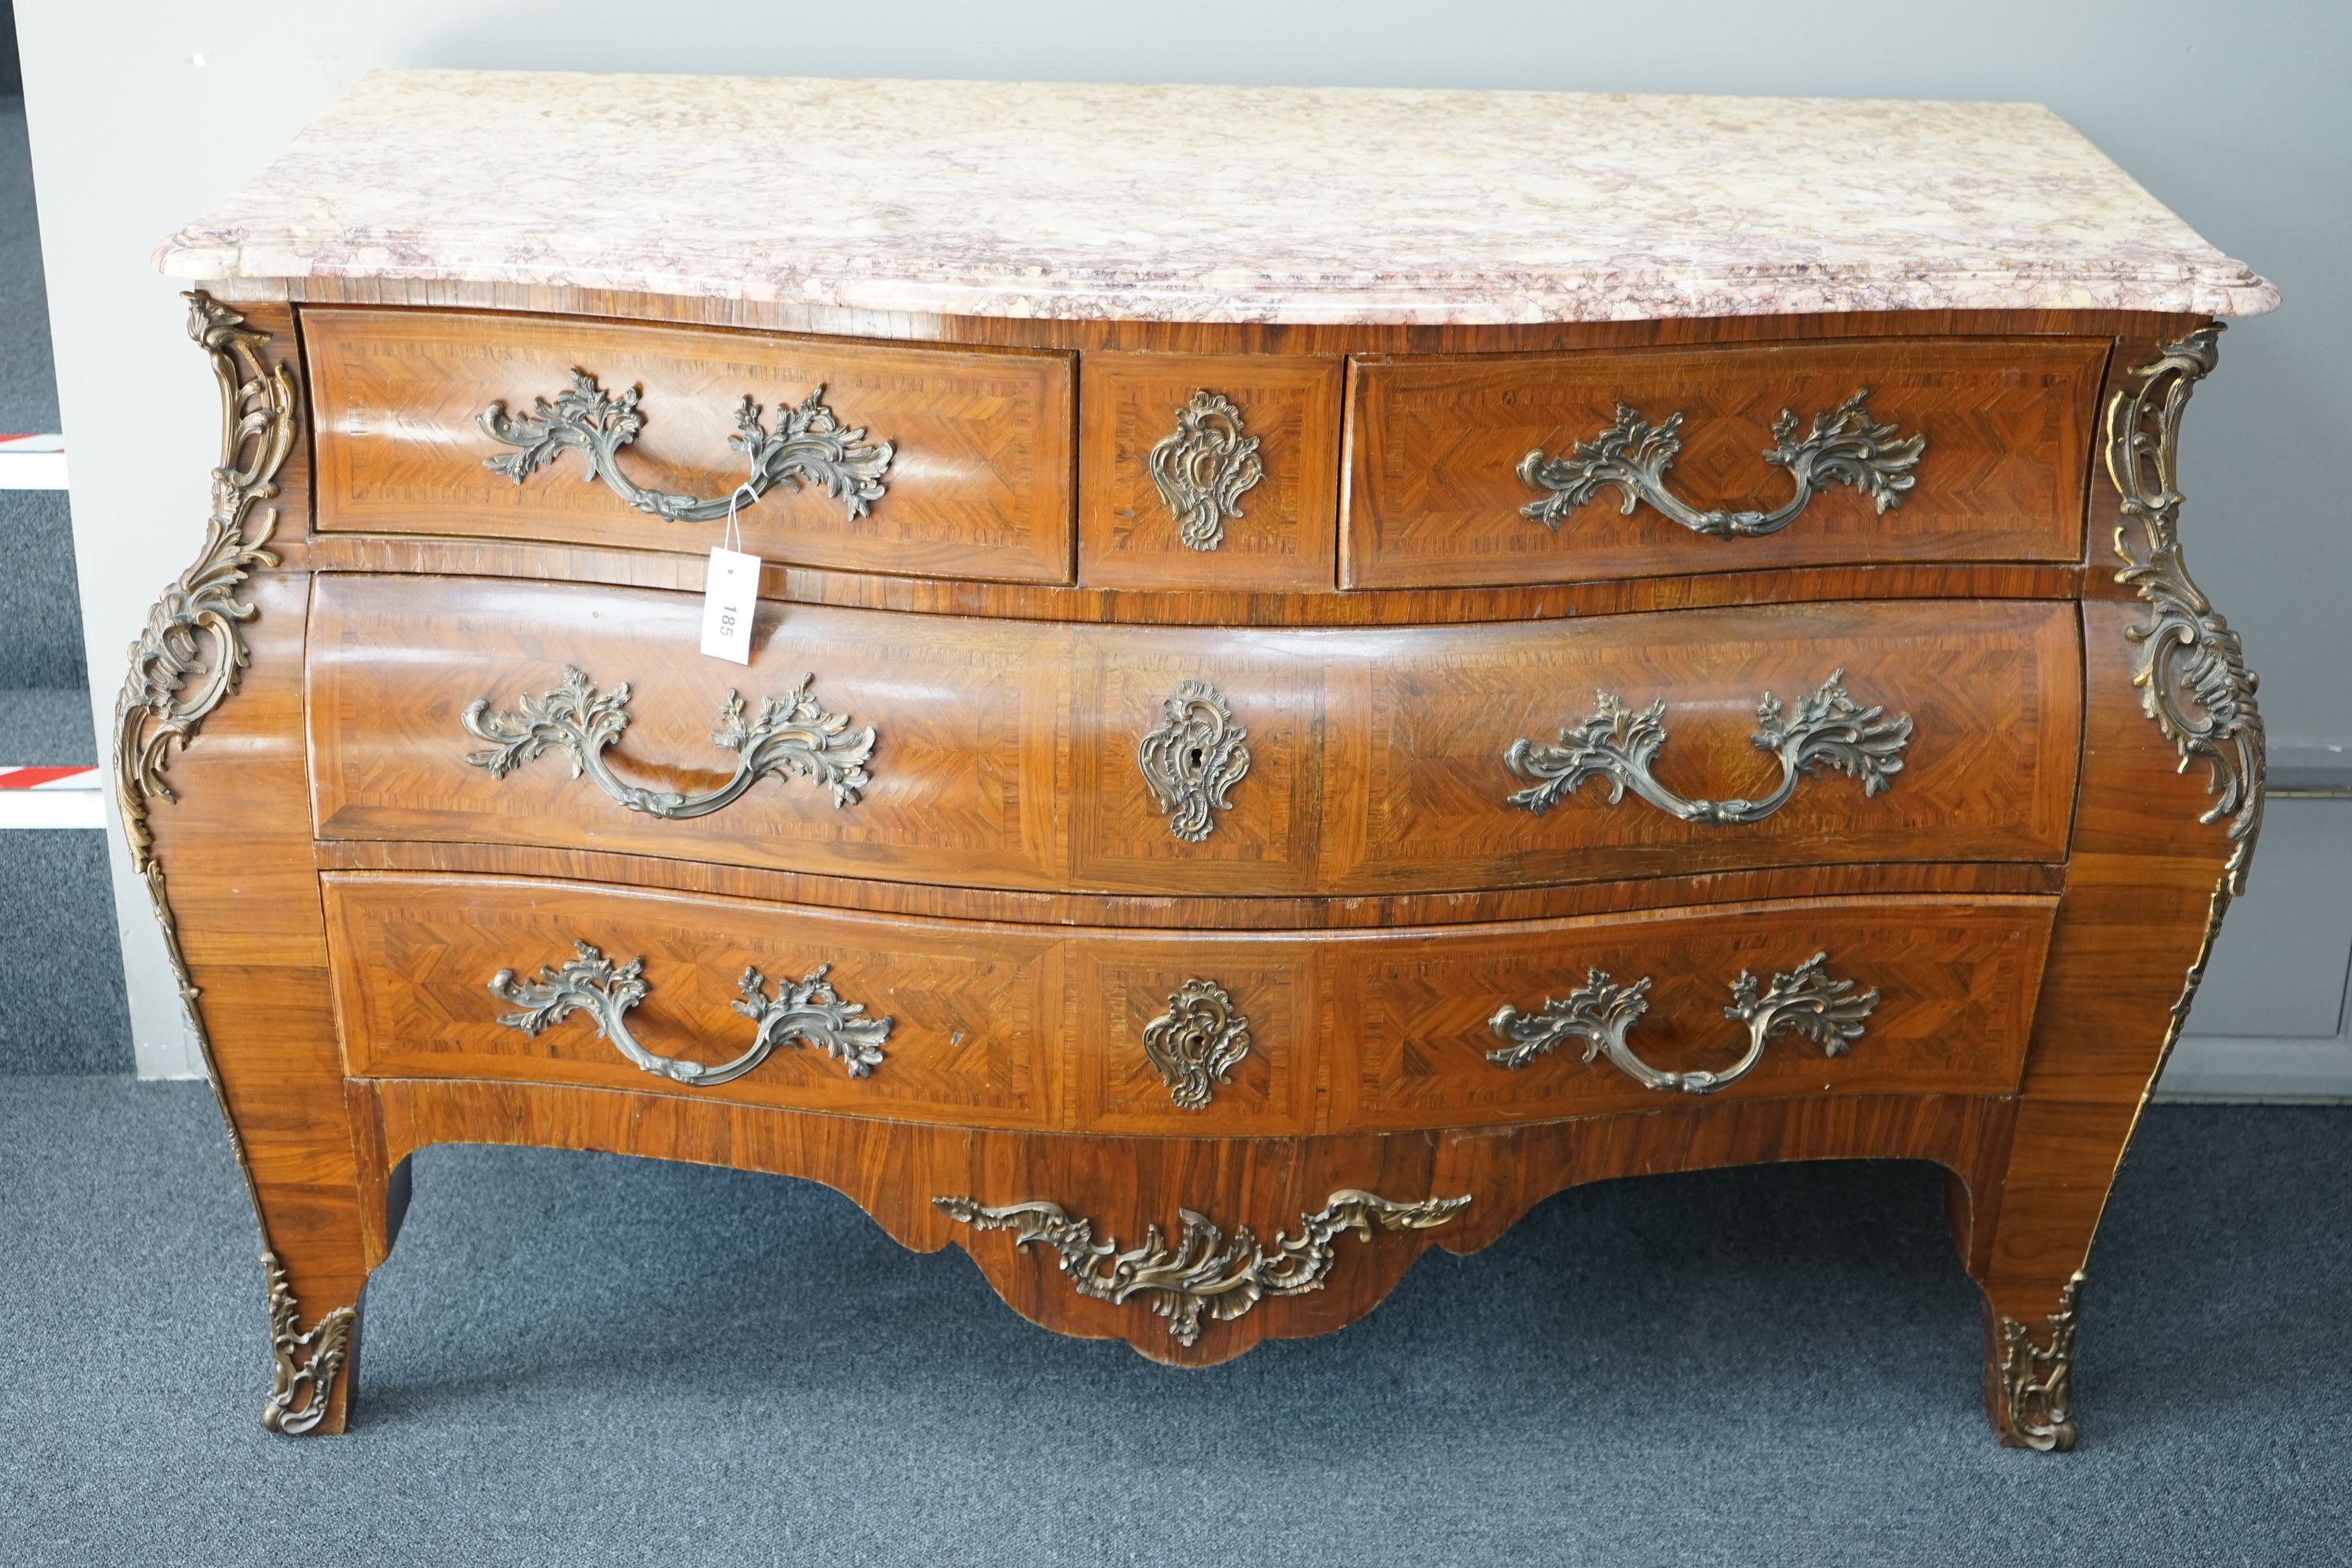 A Louis XV style marble topped serpentine bombe commode - impressed maker's stamp, M.P., width 140cm, depth 59cm, height 90cm